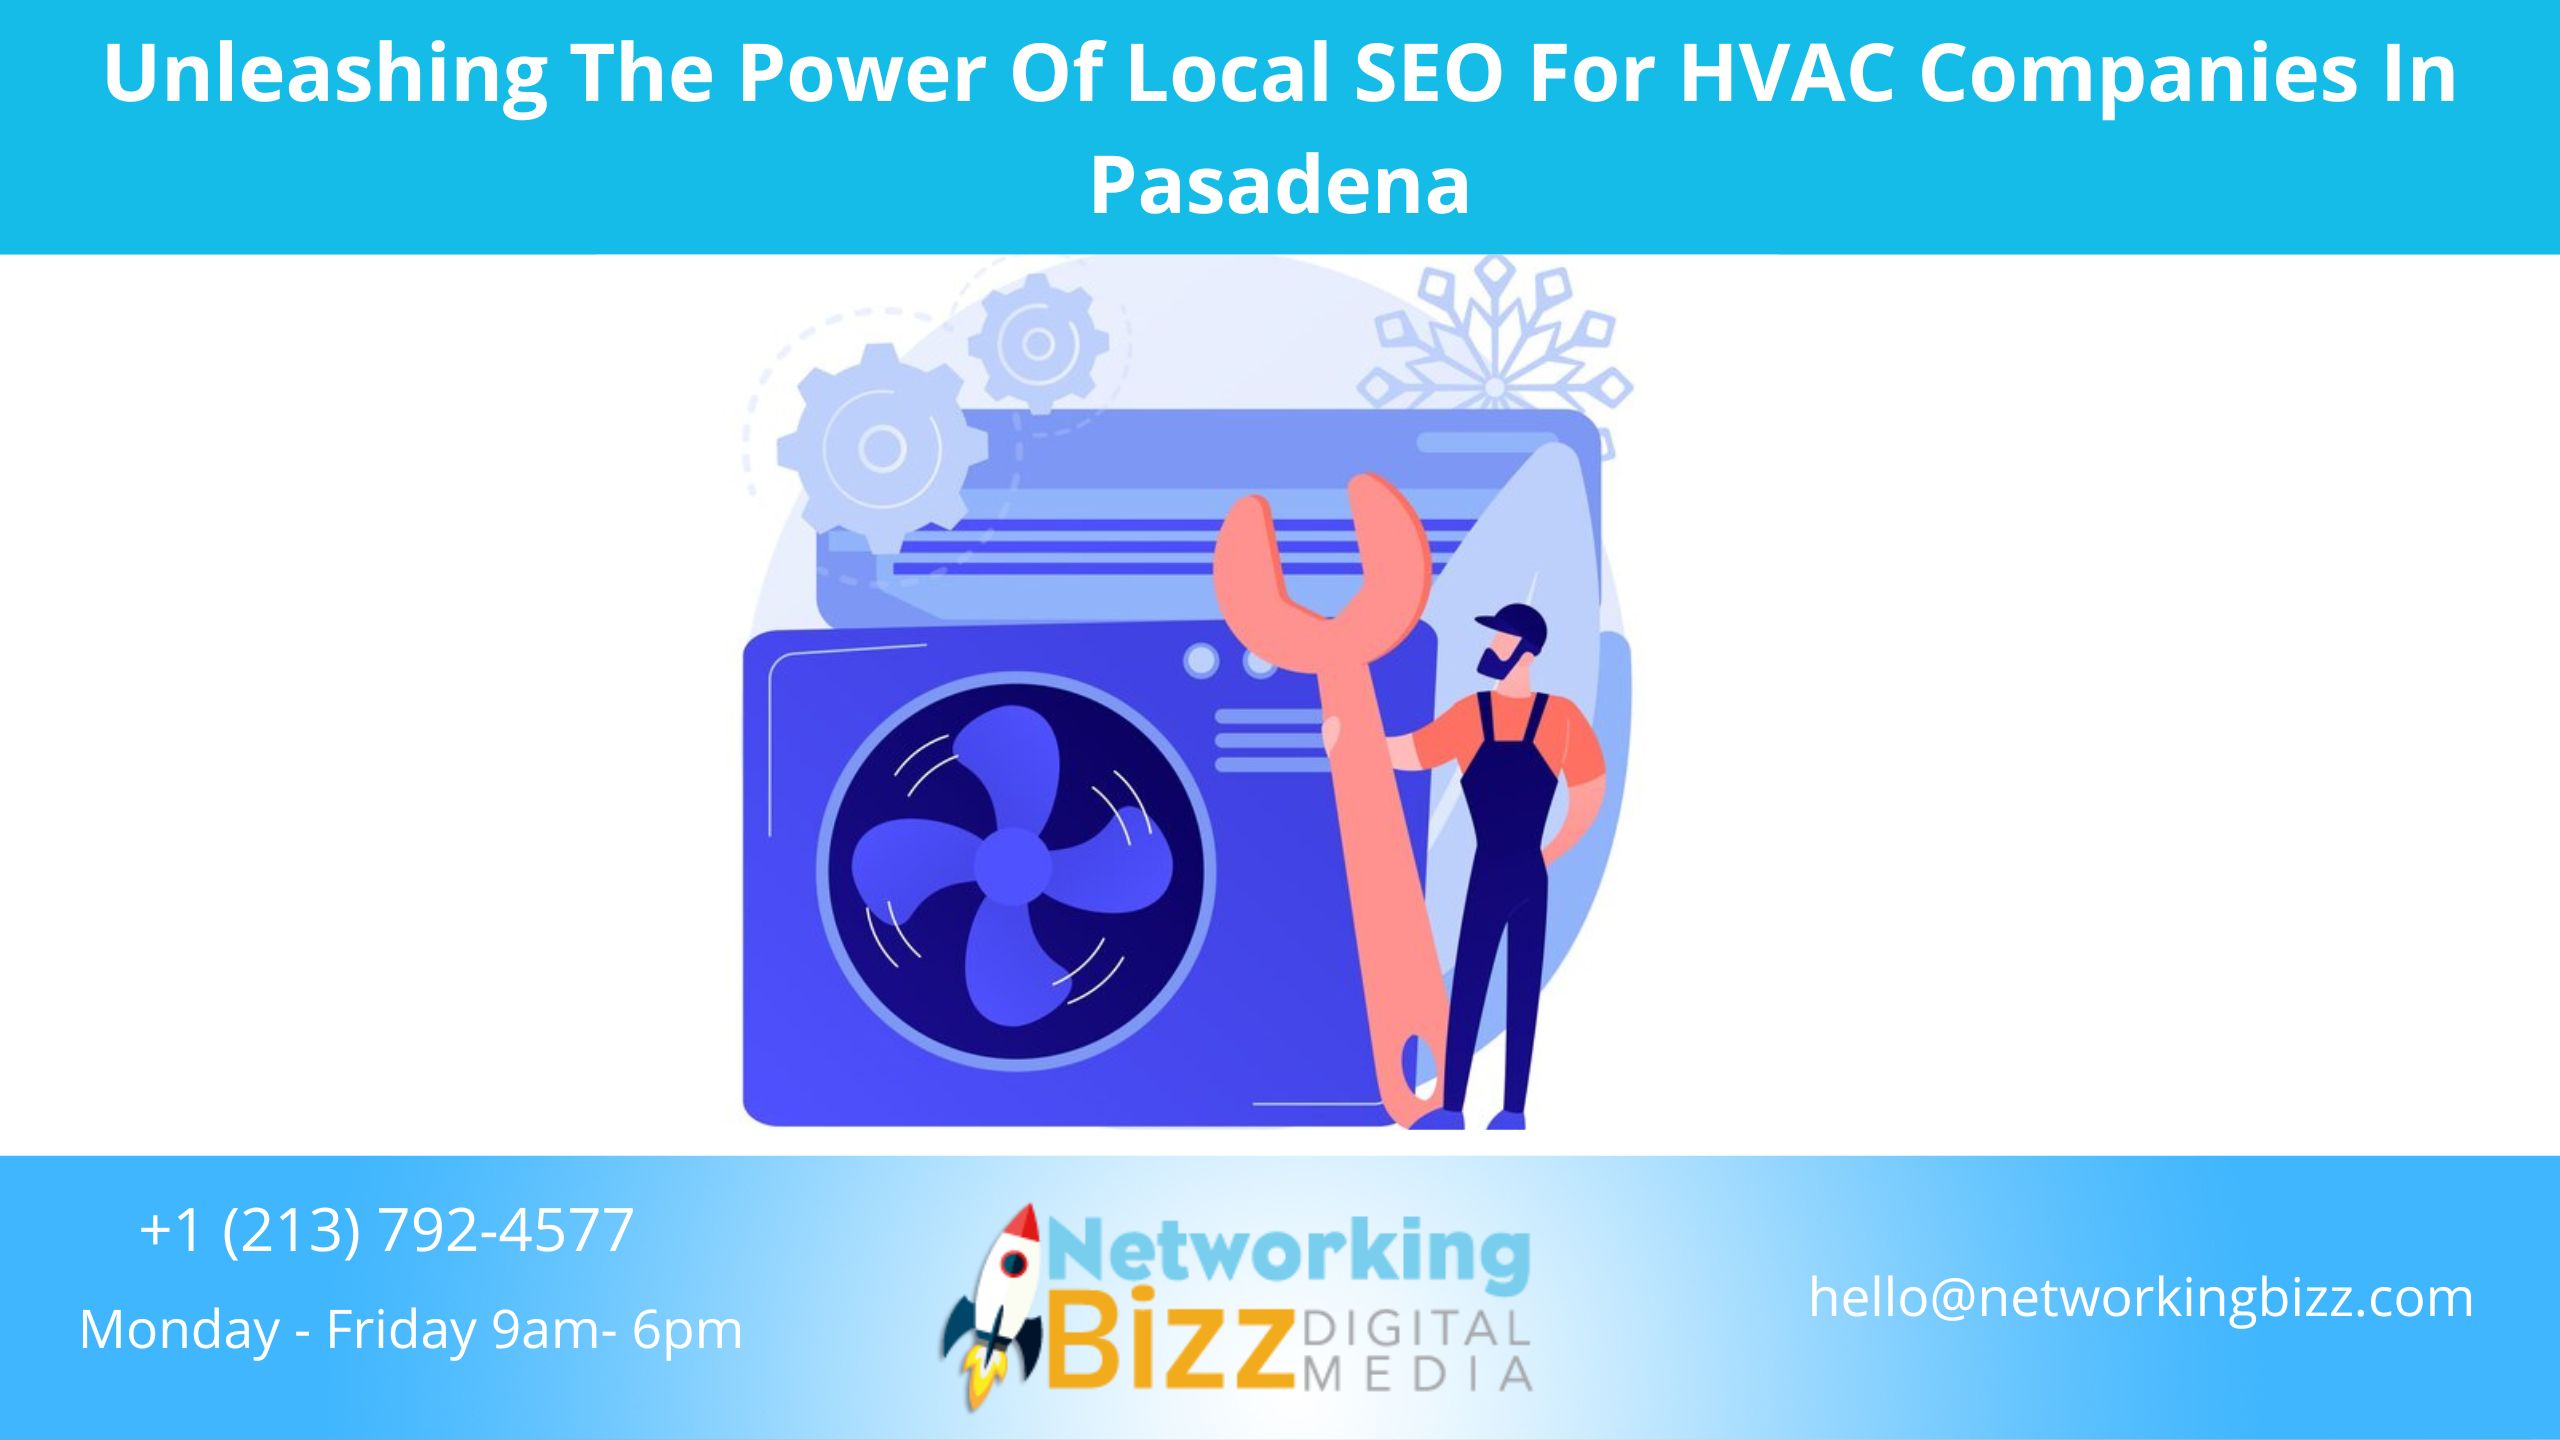 Unleashing The Power Of Local SEO For HVAC Companies In Pasadena